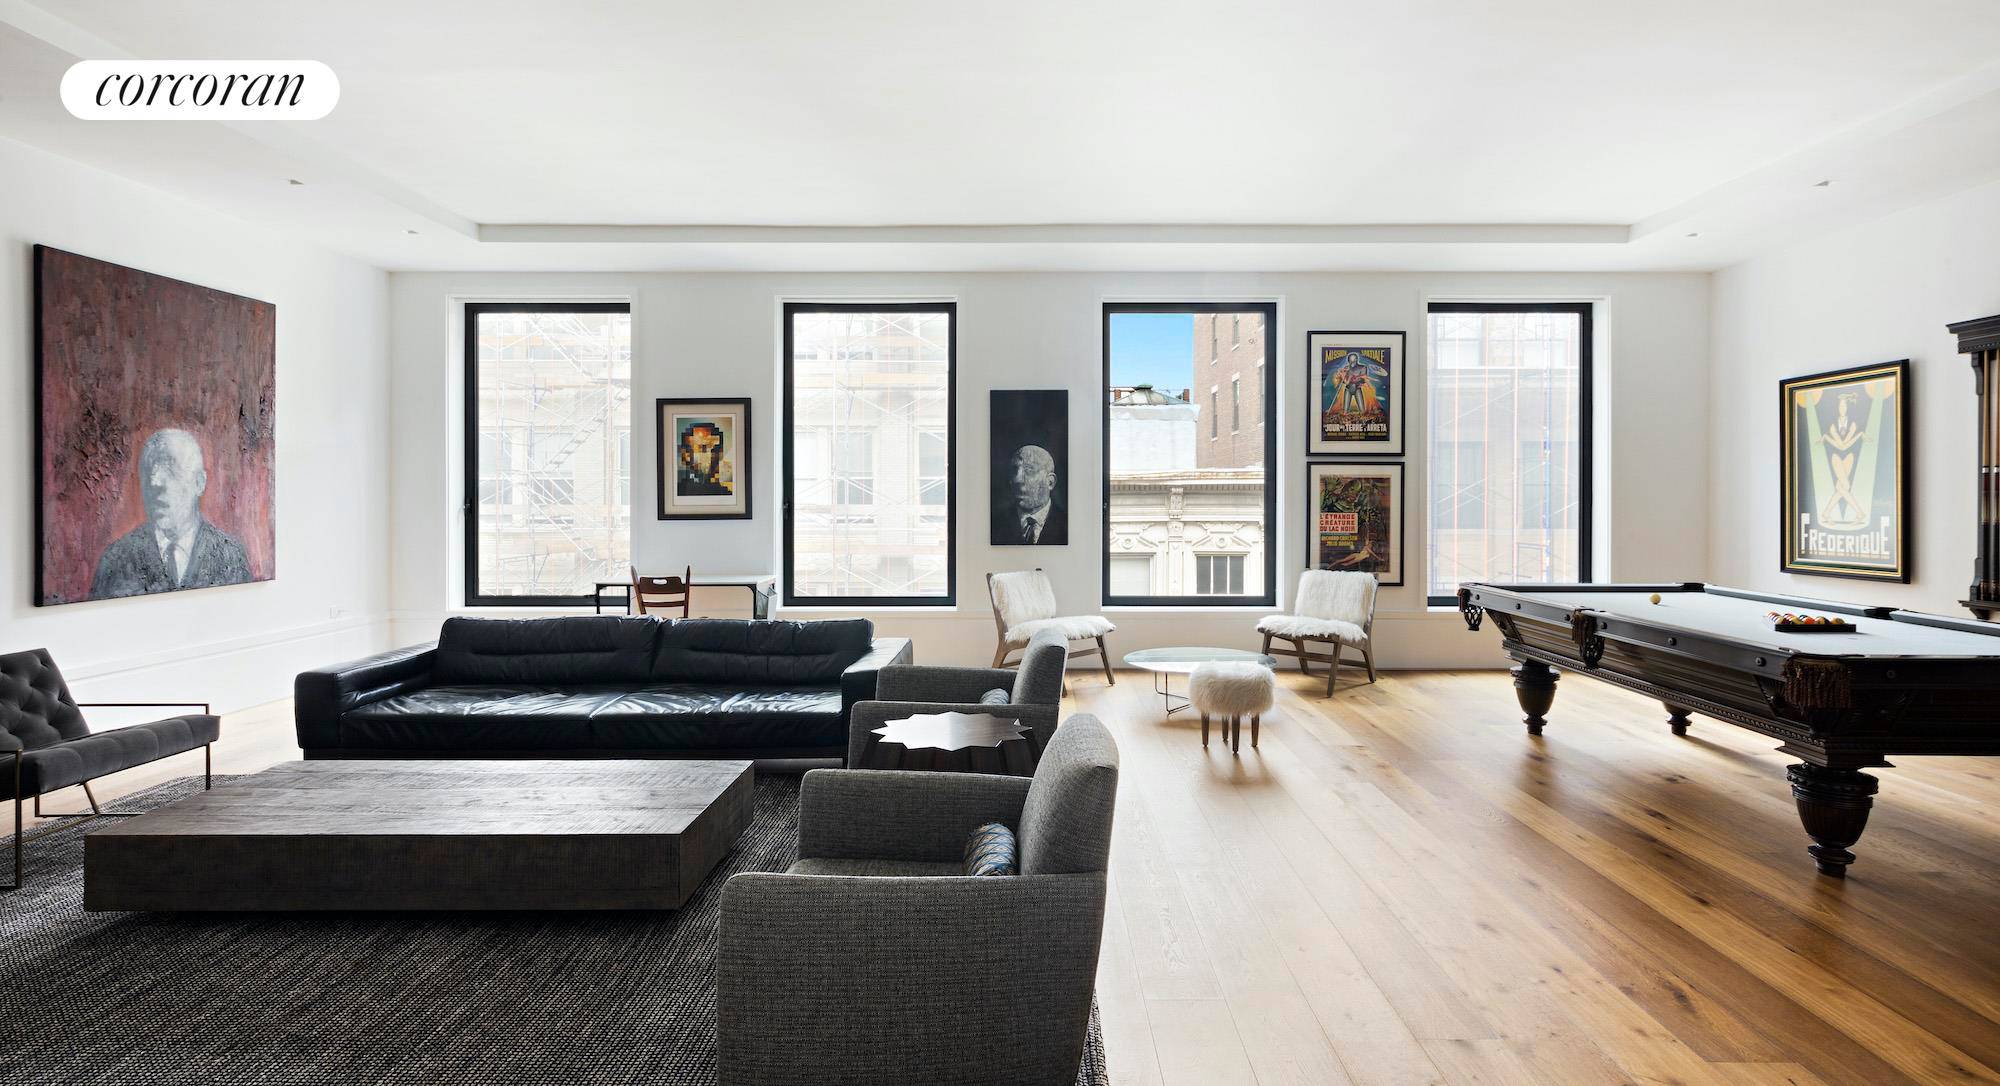 This breathtaking four bedroom loft with private outdoor space represents a rare opportunity to enjoy new construction style and convenience inspired by SoHo's legendary cast iron buildings.